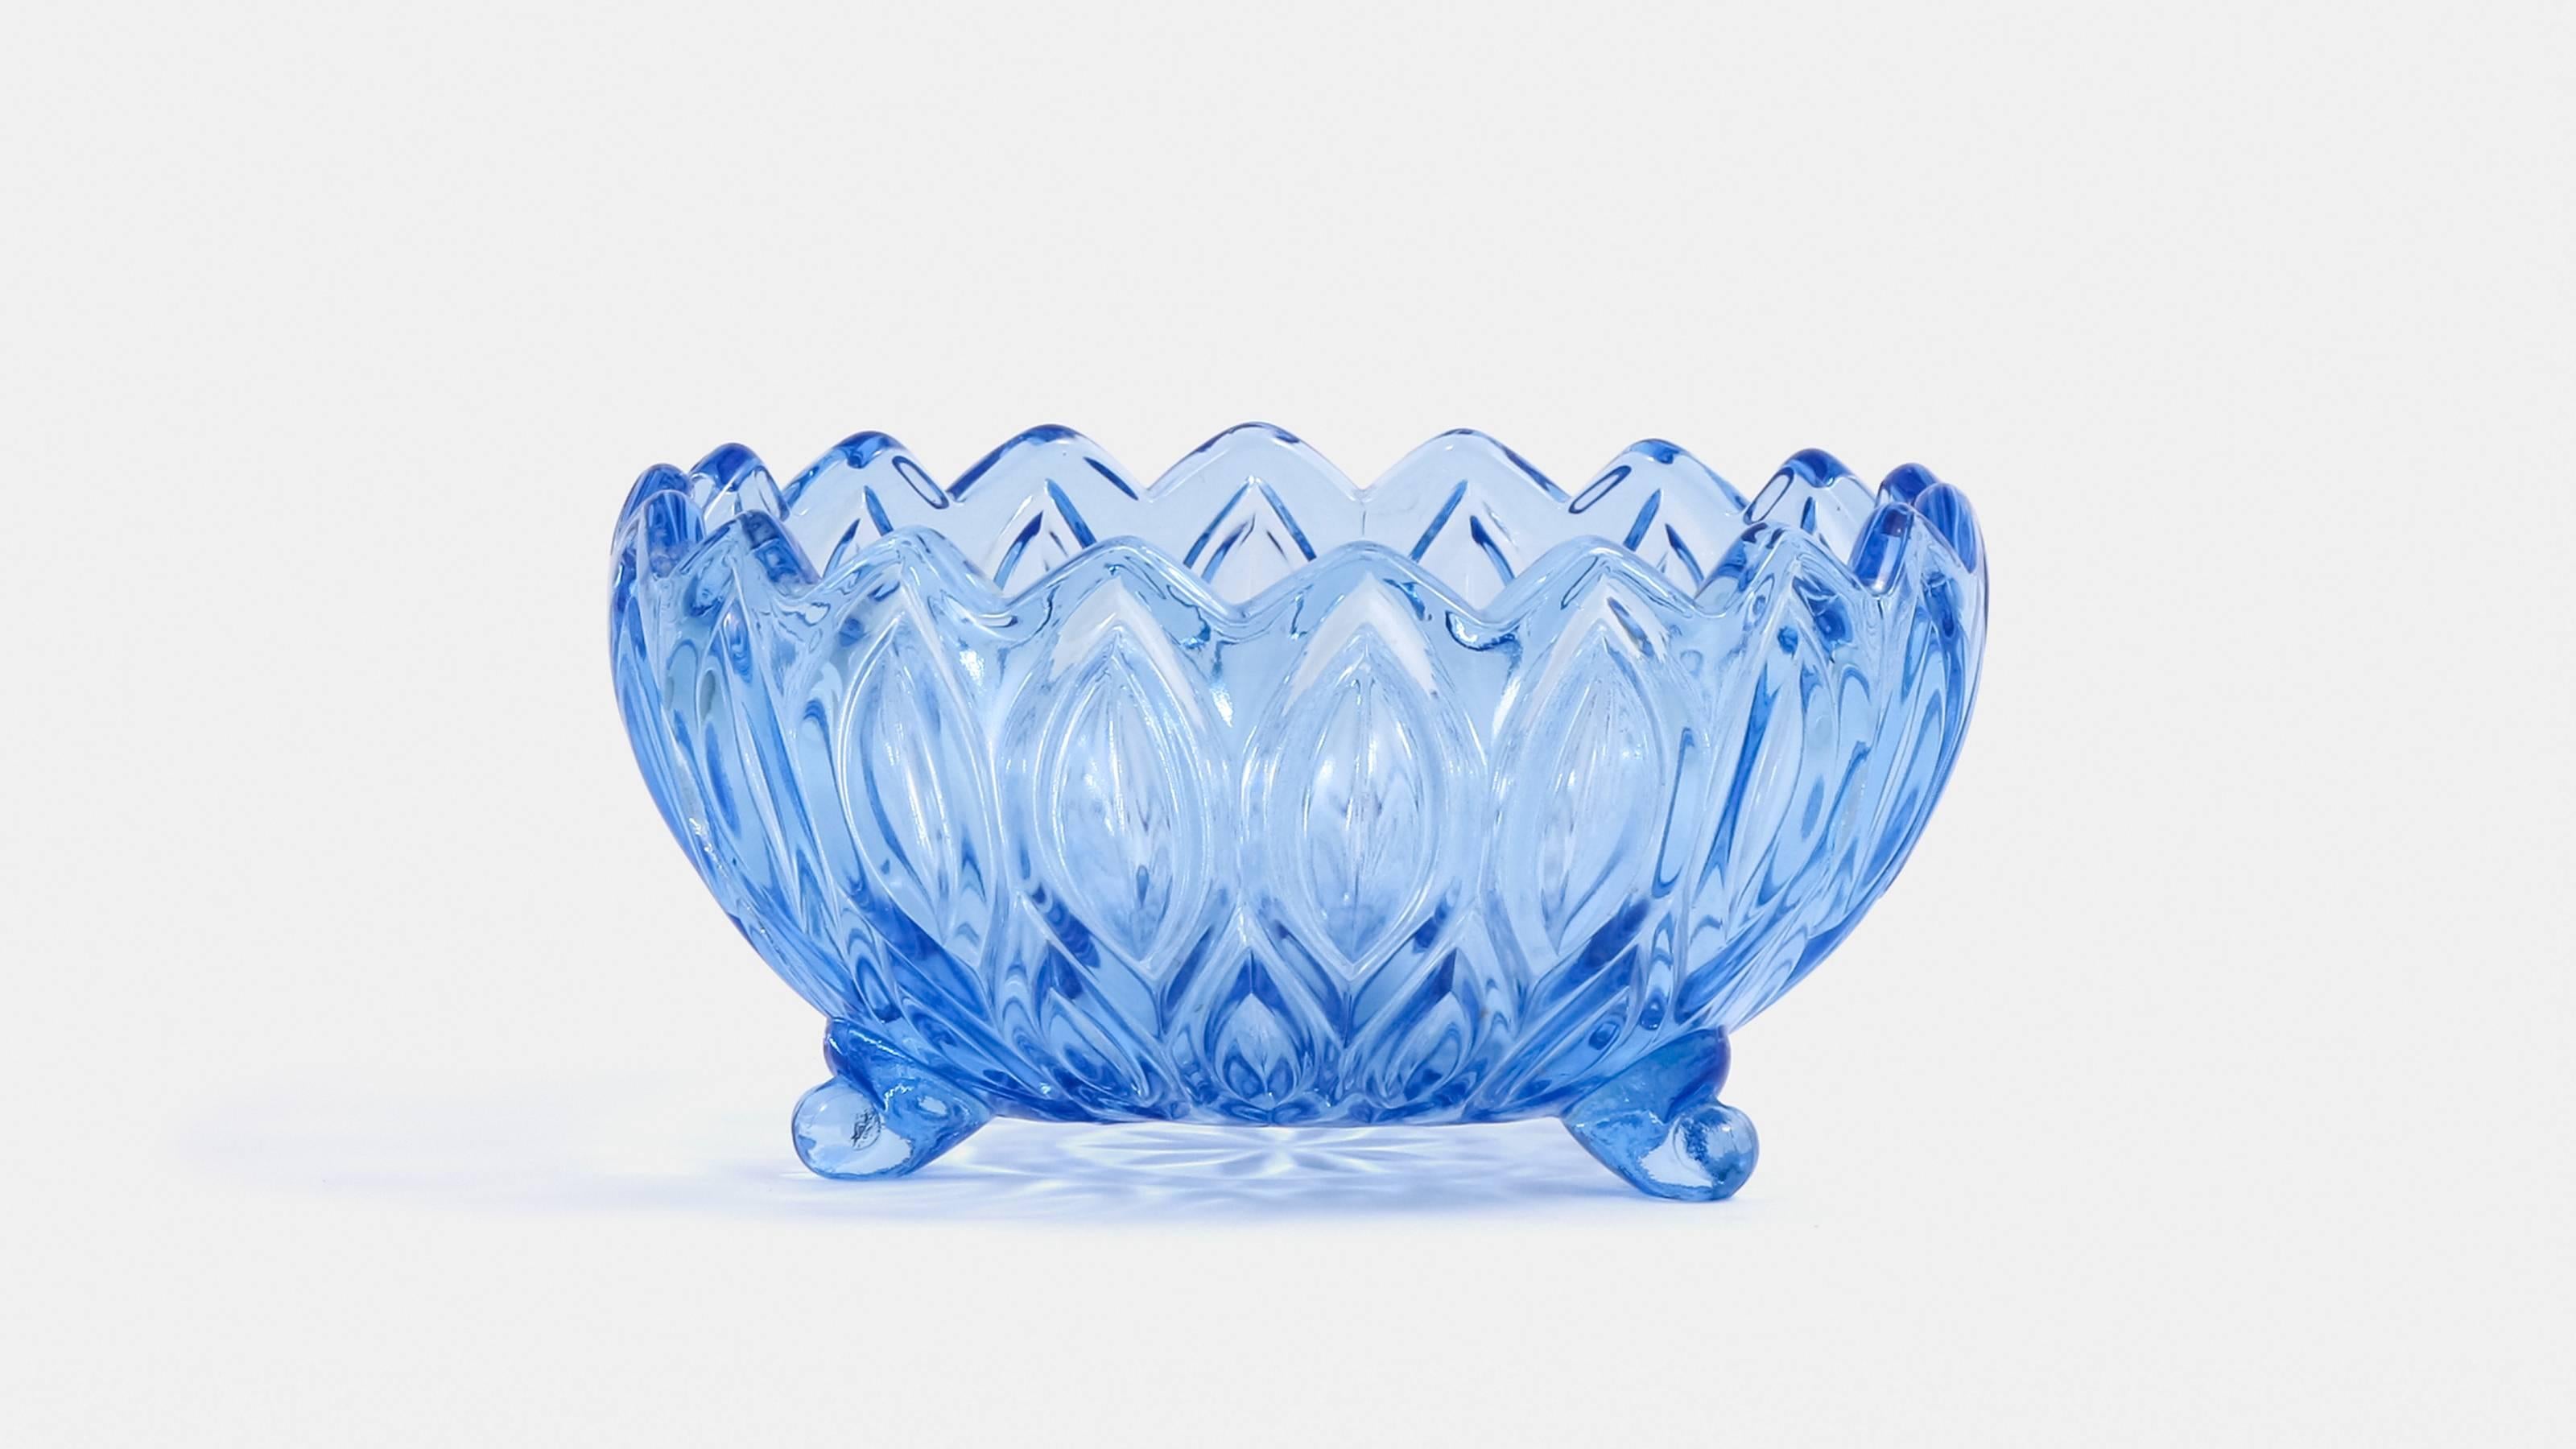 A beautiful set of 1950s blue glass serving bowls consisting of one large bowl and three smaller bowls.